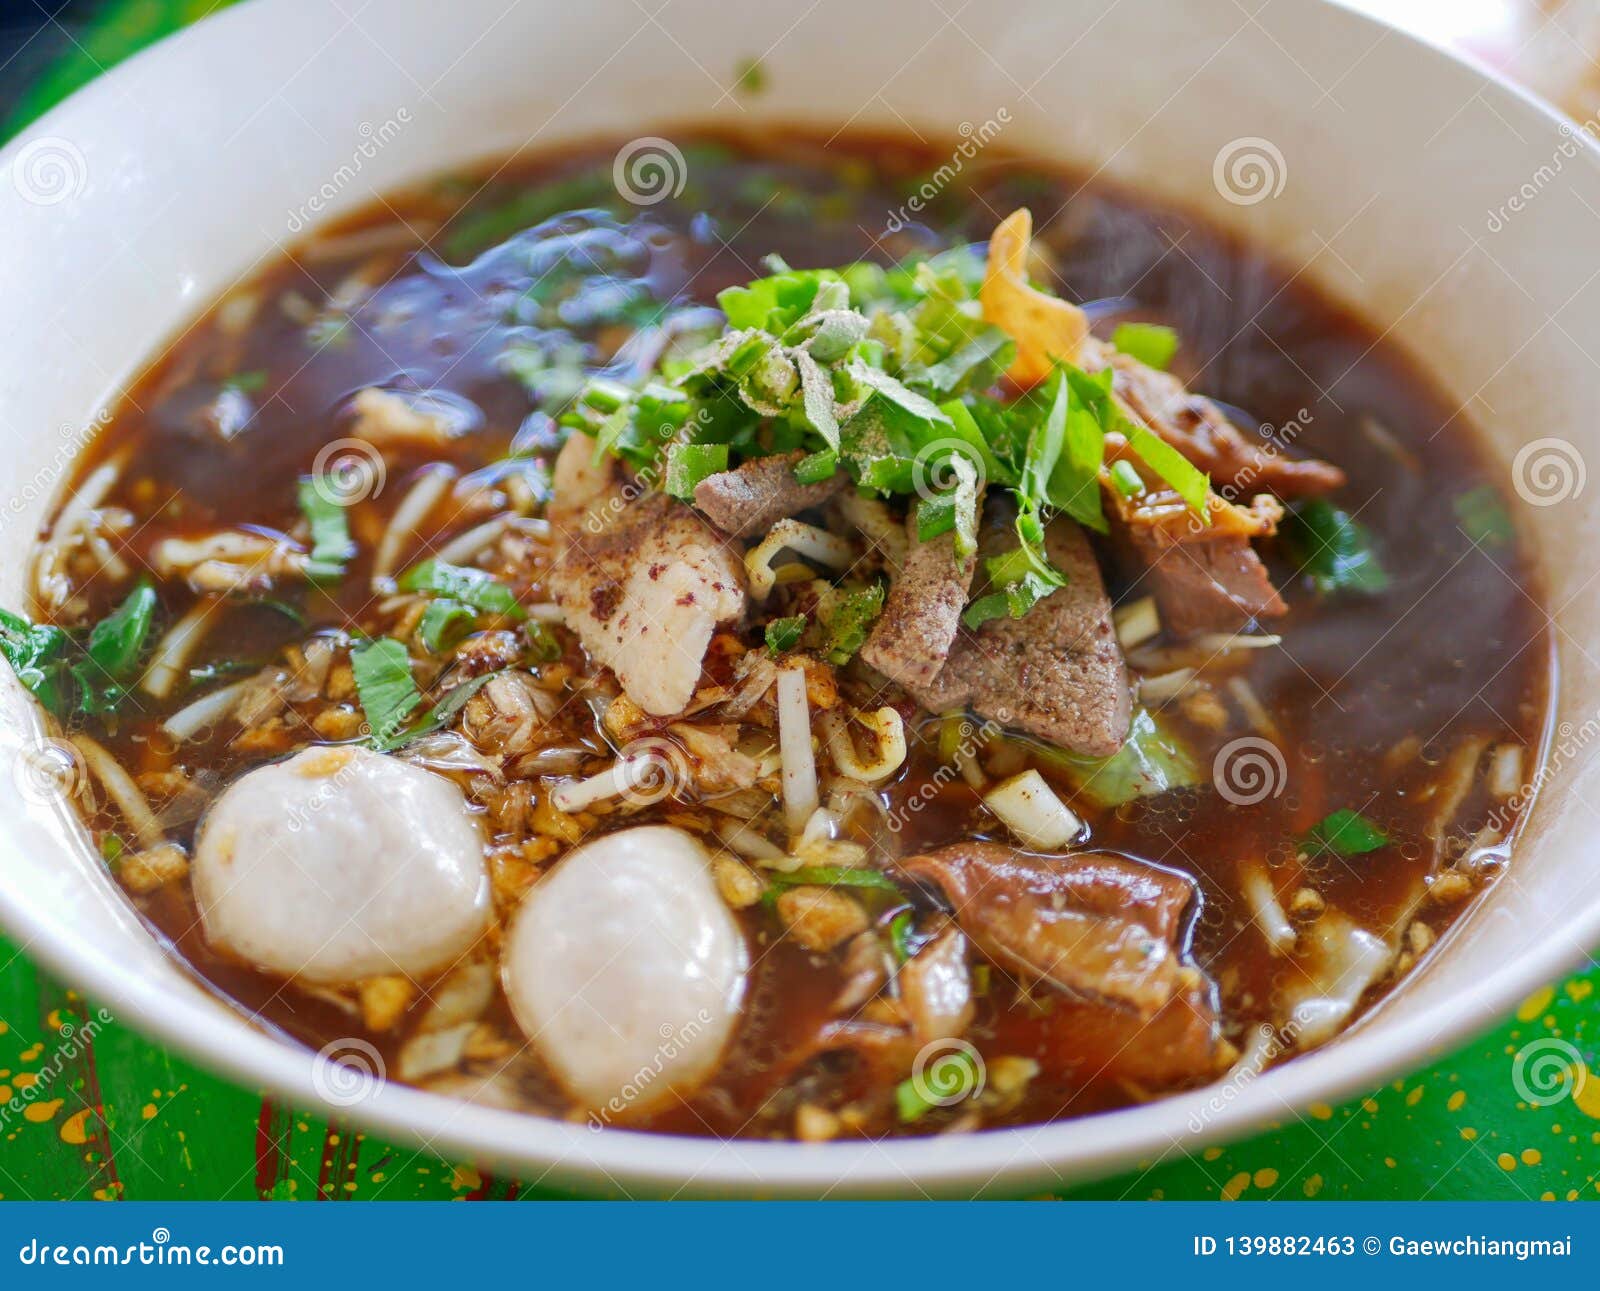 fresh noodles soup with pork and its tasty thick broth guay tiao nam tok moo - delicious and healthy street food in thailand